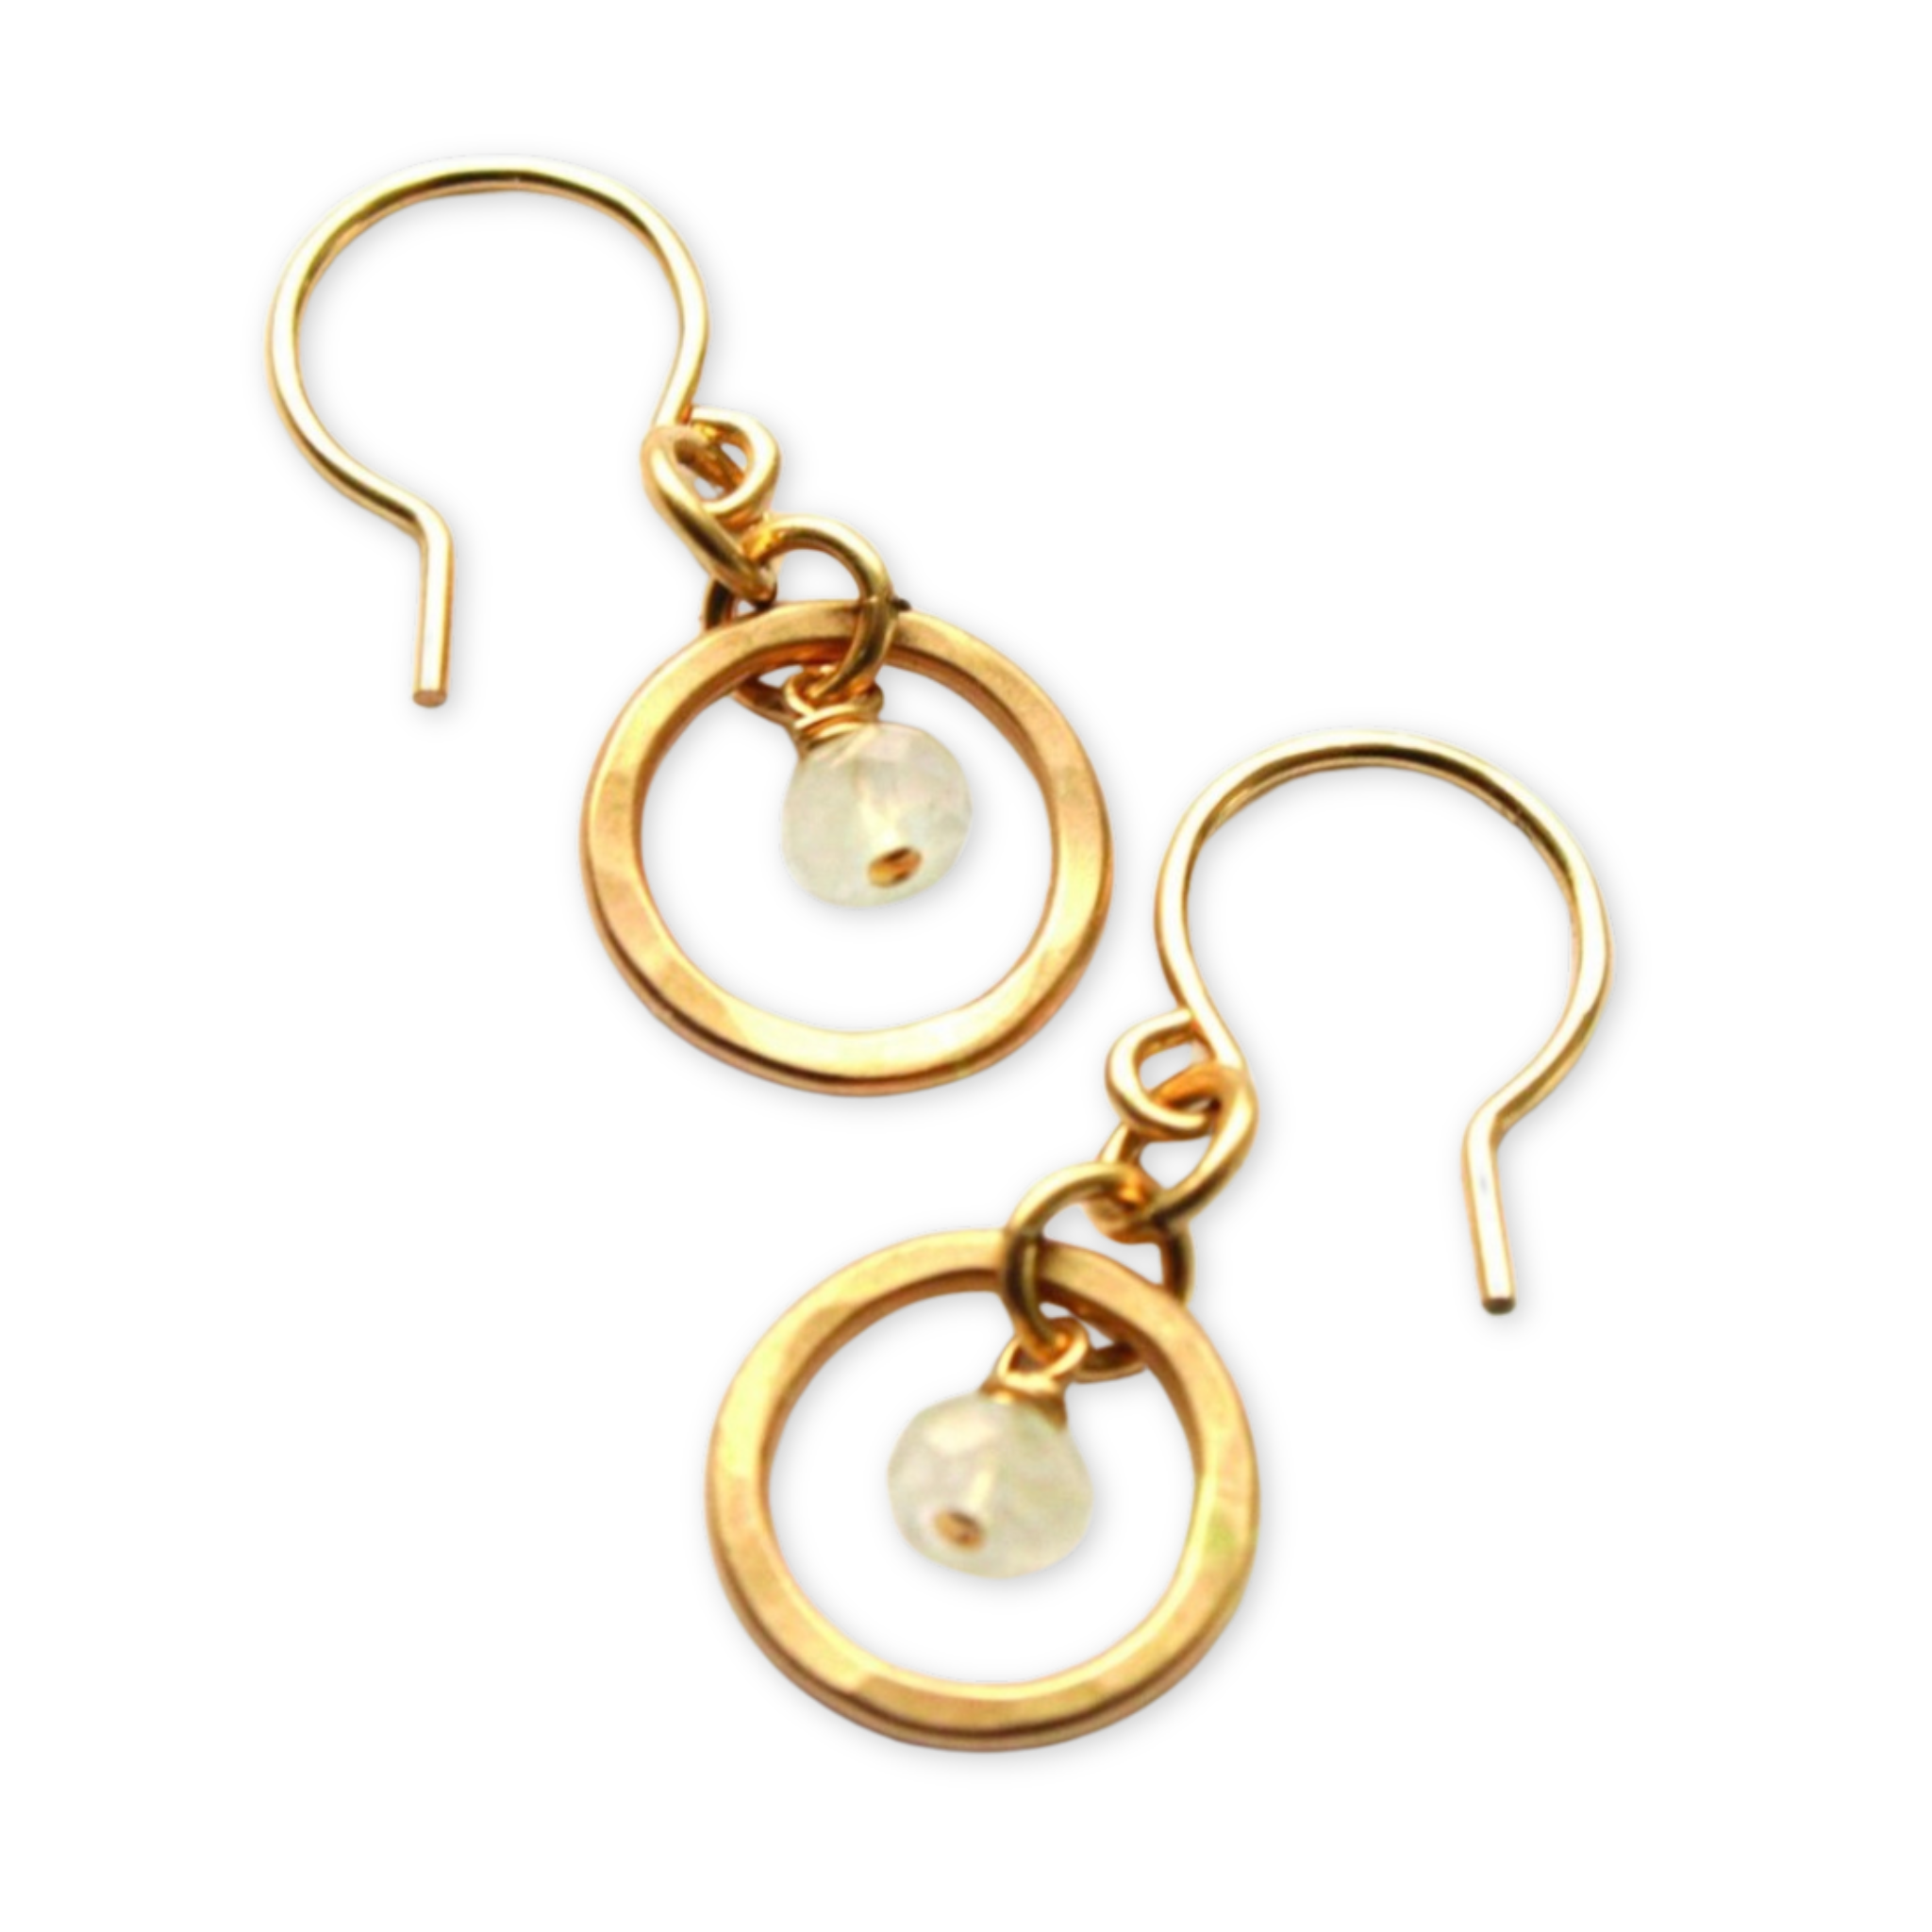 earrings with a small hammered open circle pendant and a small faceted stone dangling stone